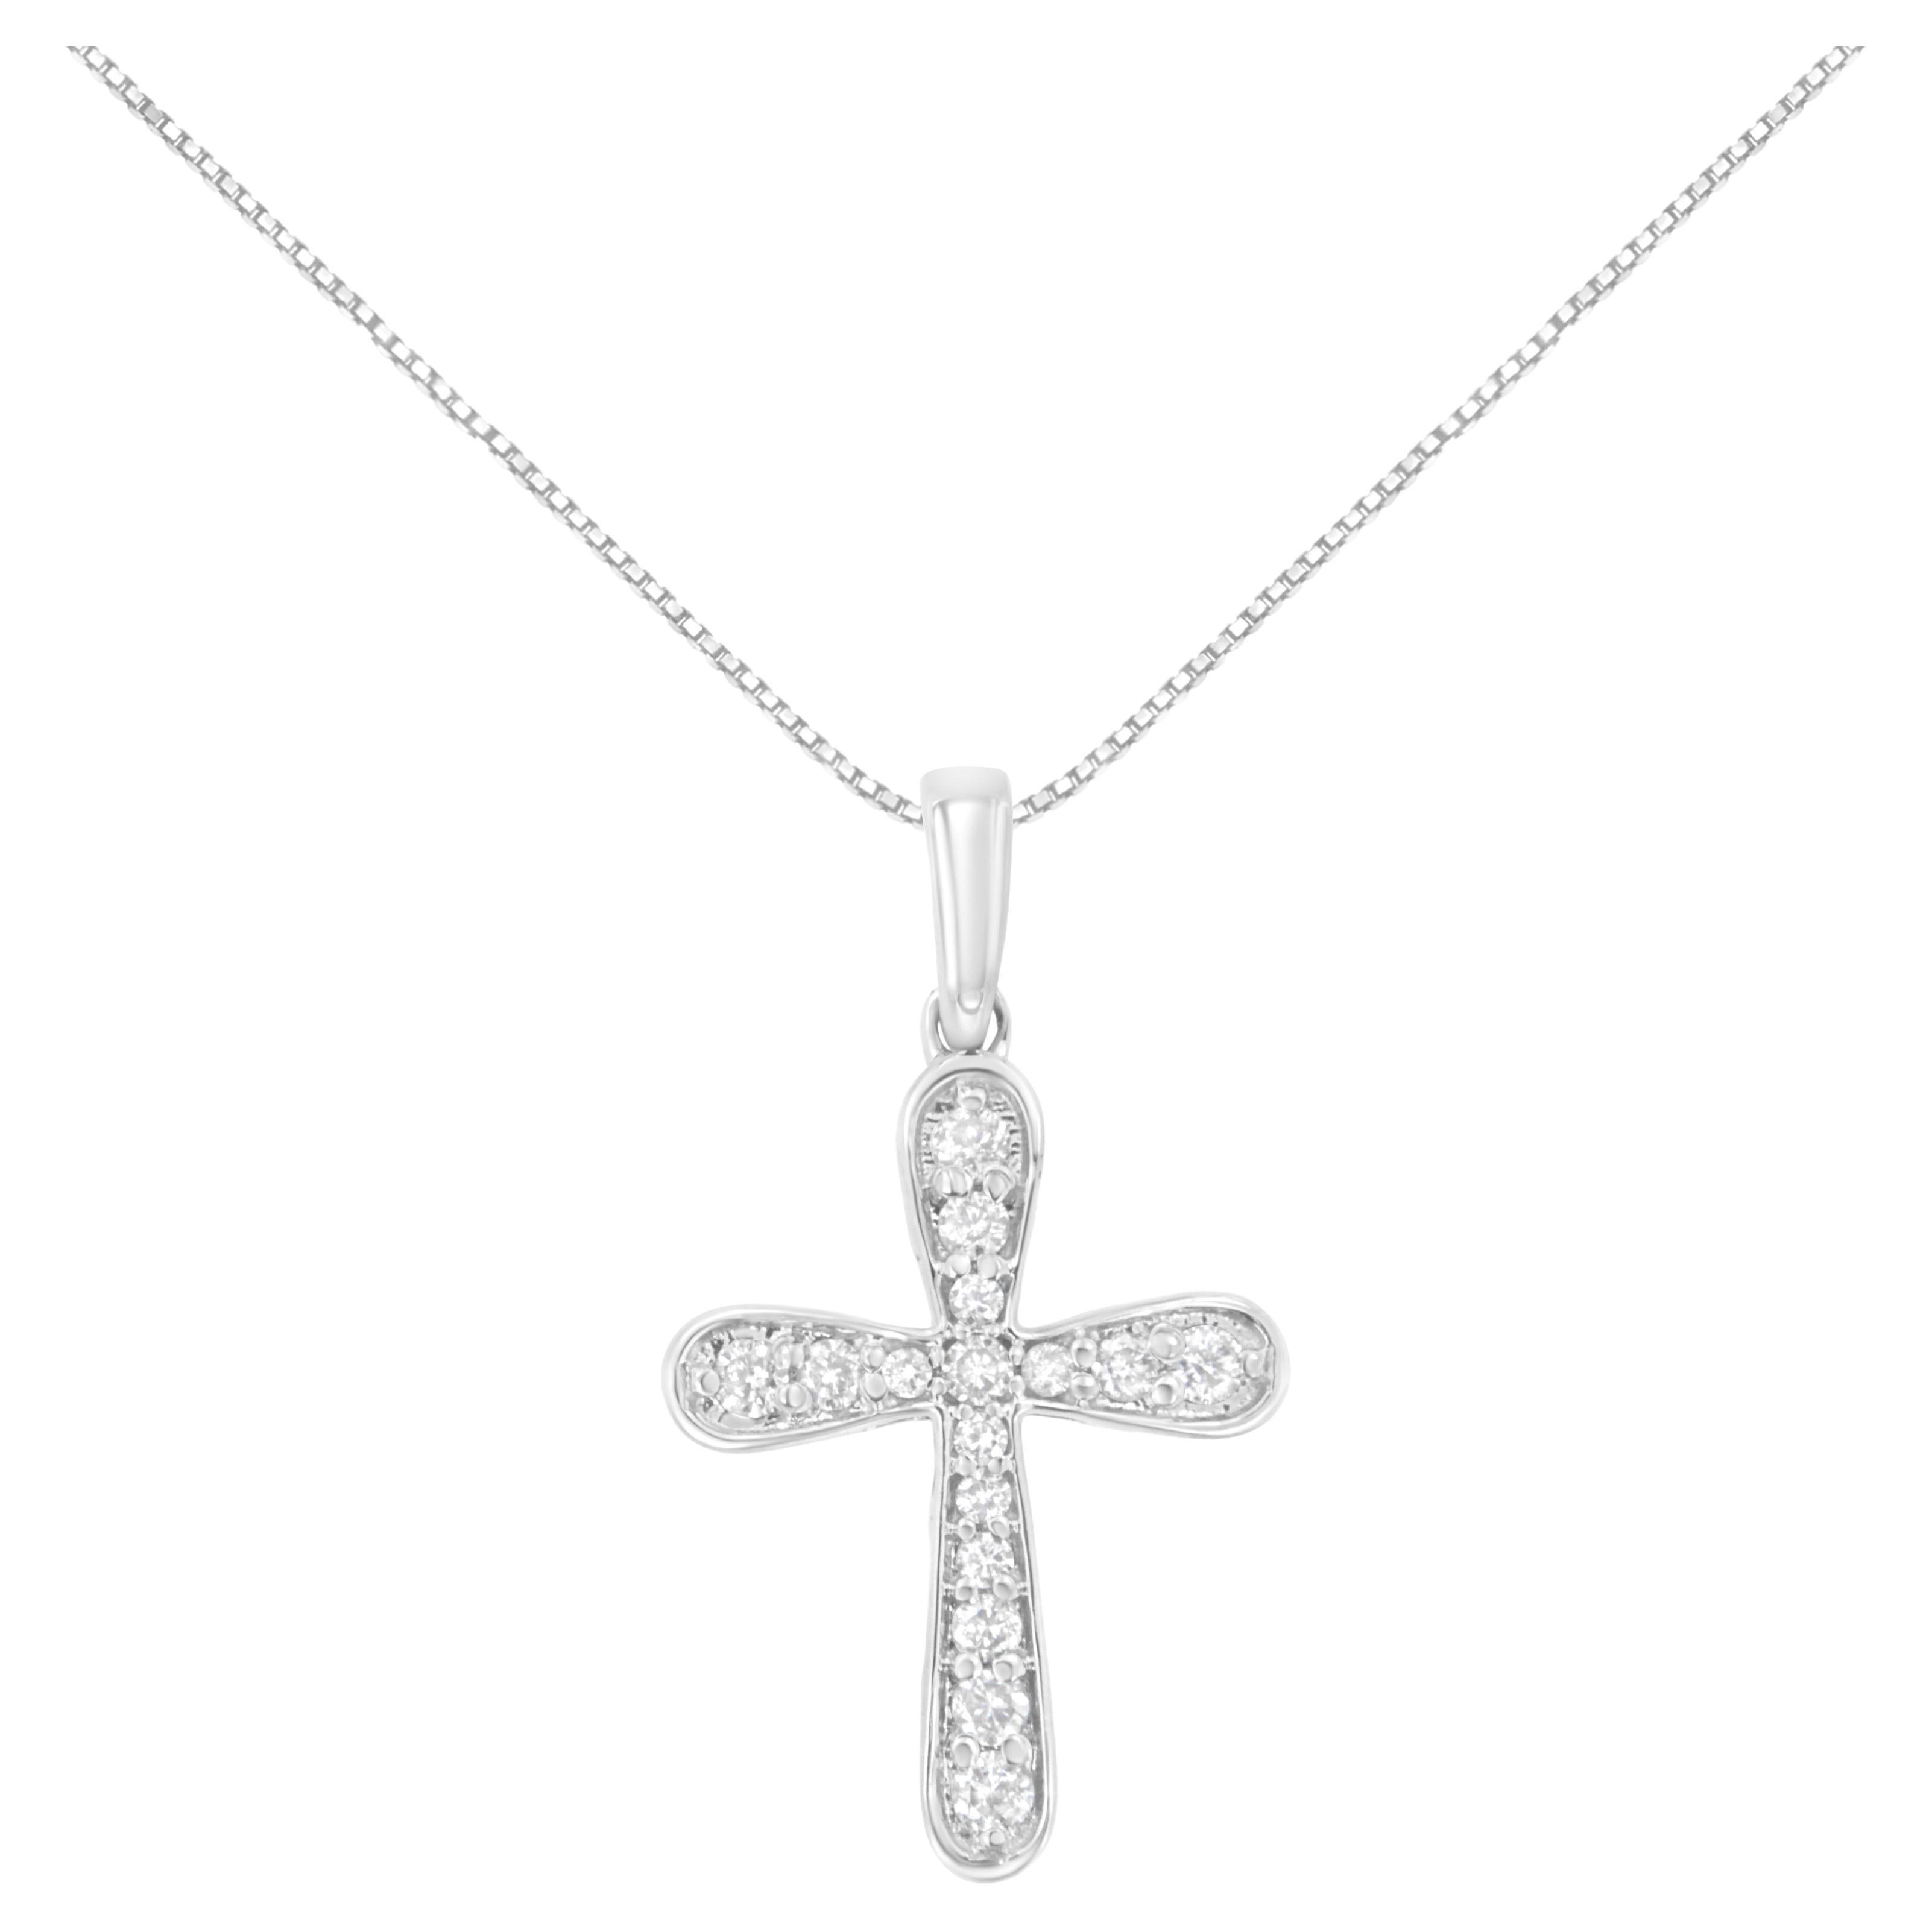 .925 Sterling Silver 1/4 Carat Diamond Inlaid Cross 18" Pendant Necklace For Sale